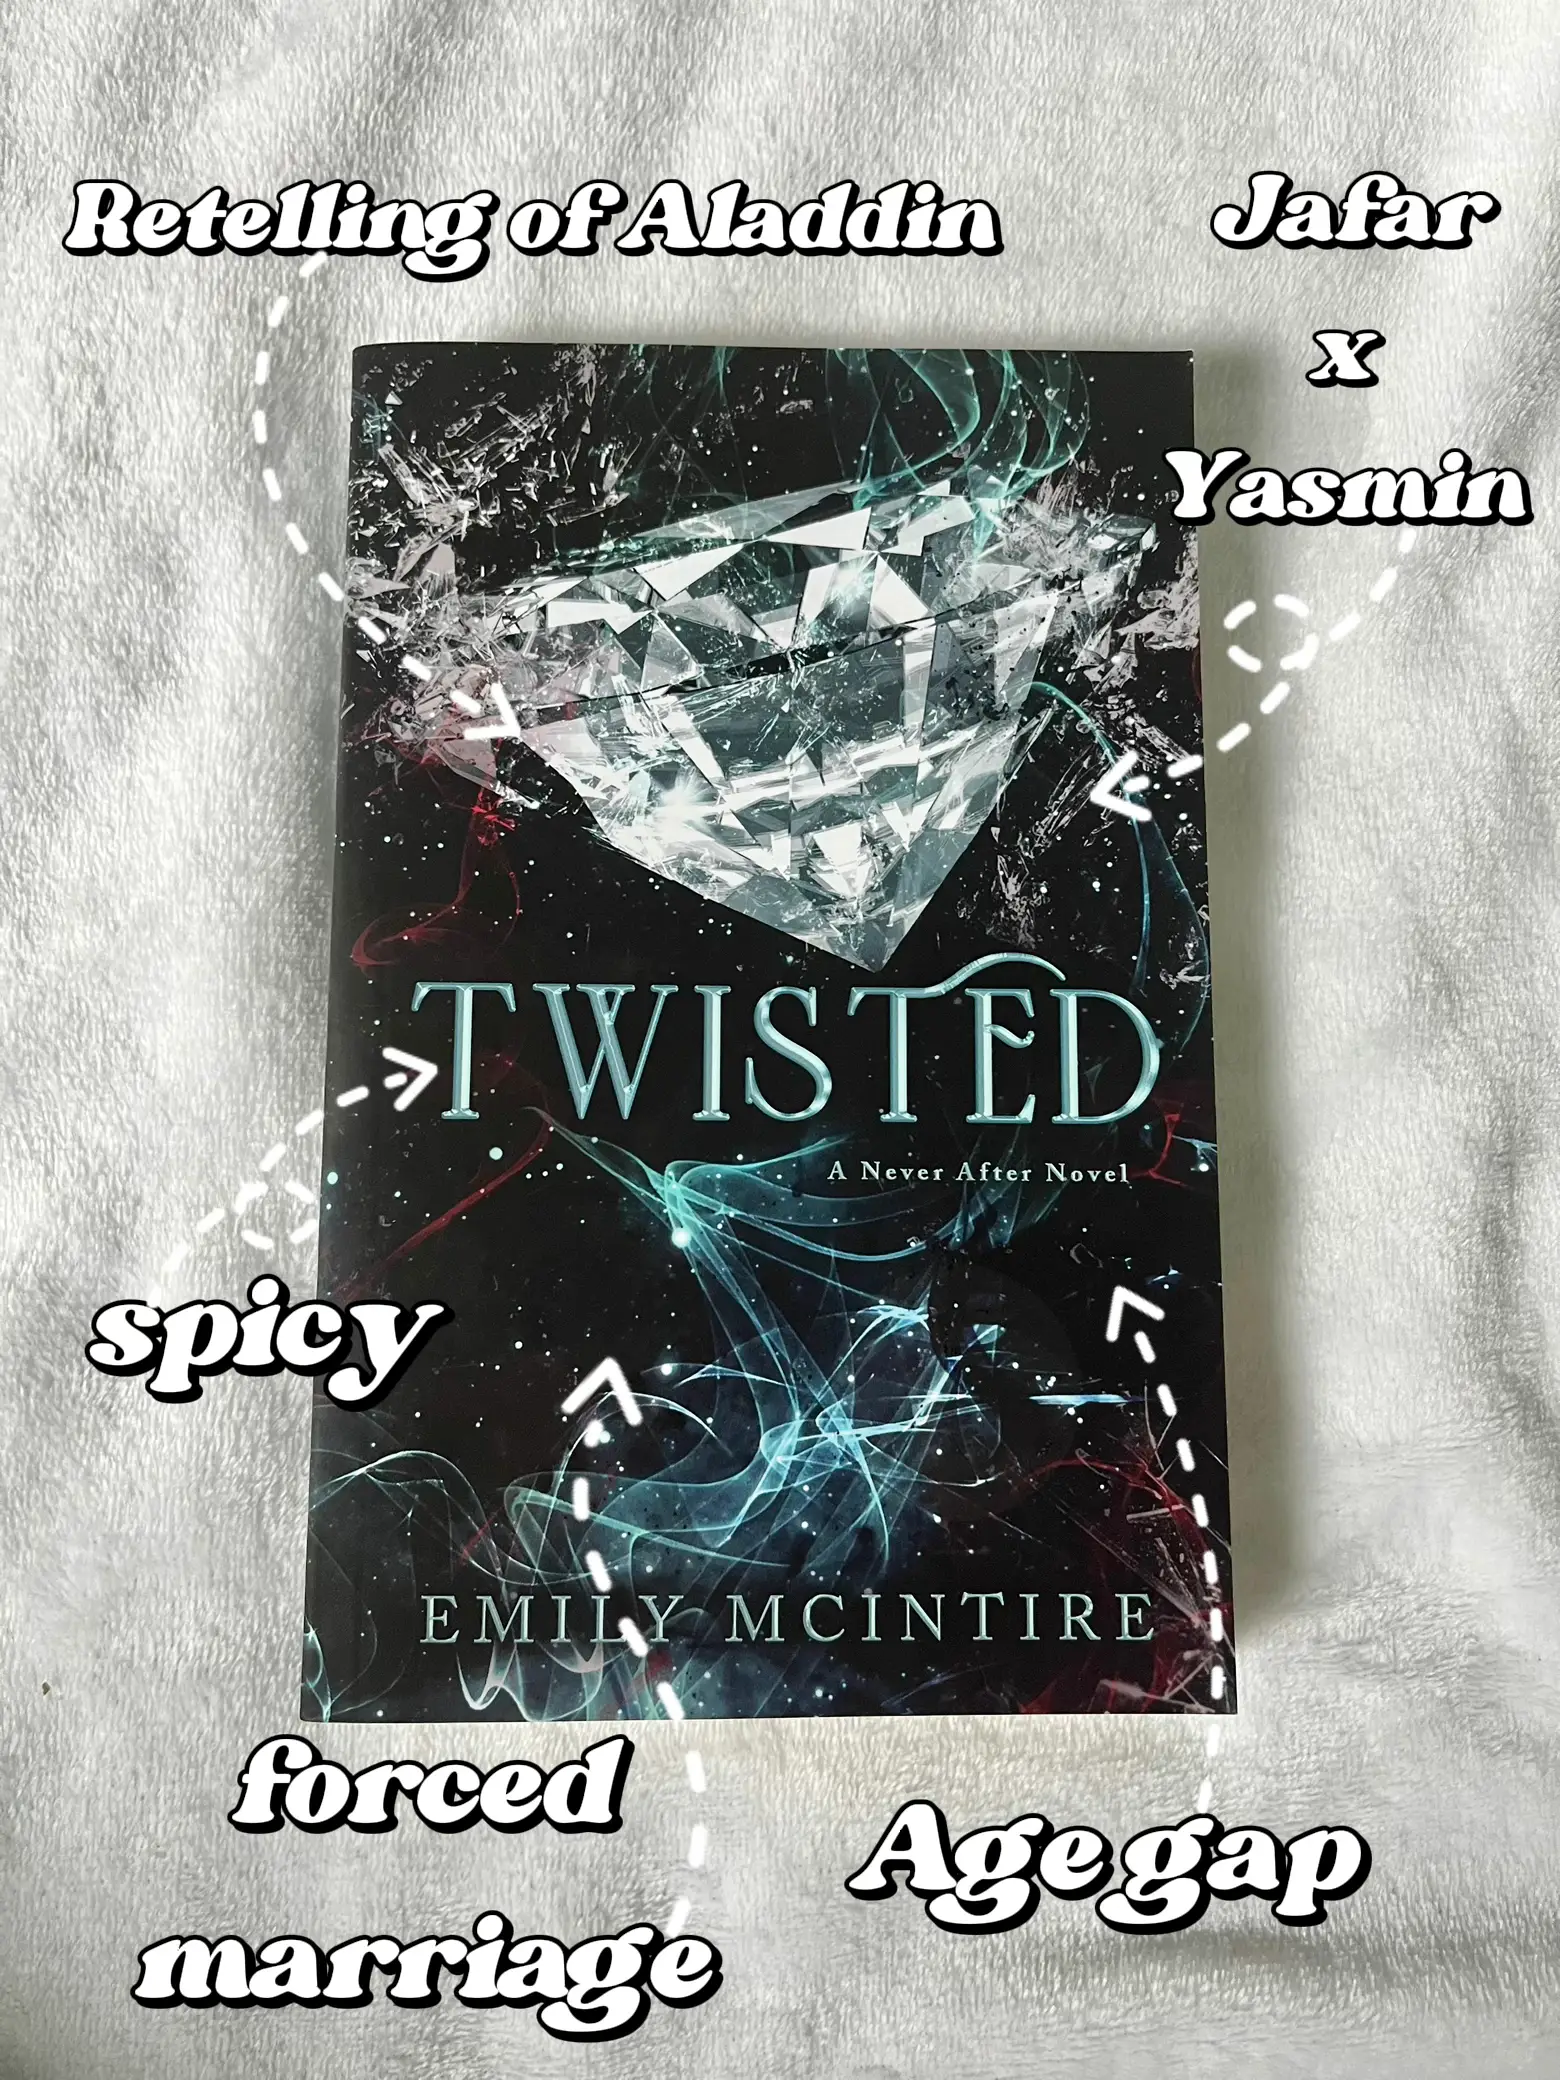  A book cover with a Twisted Love Novel written by Emily McIntire.